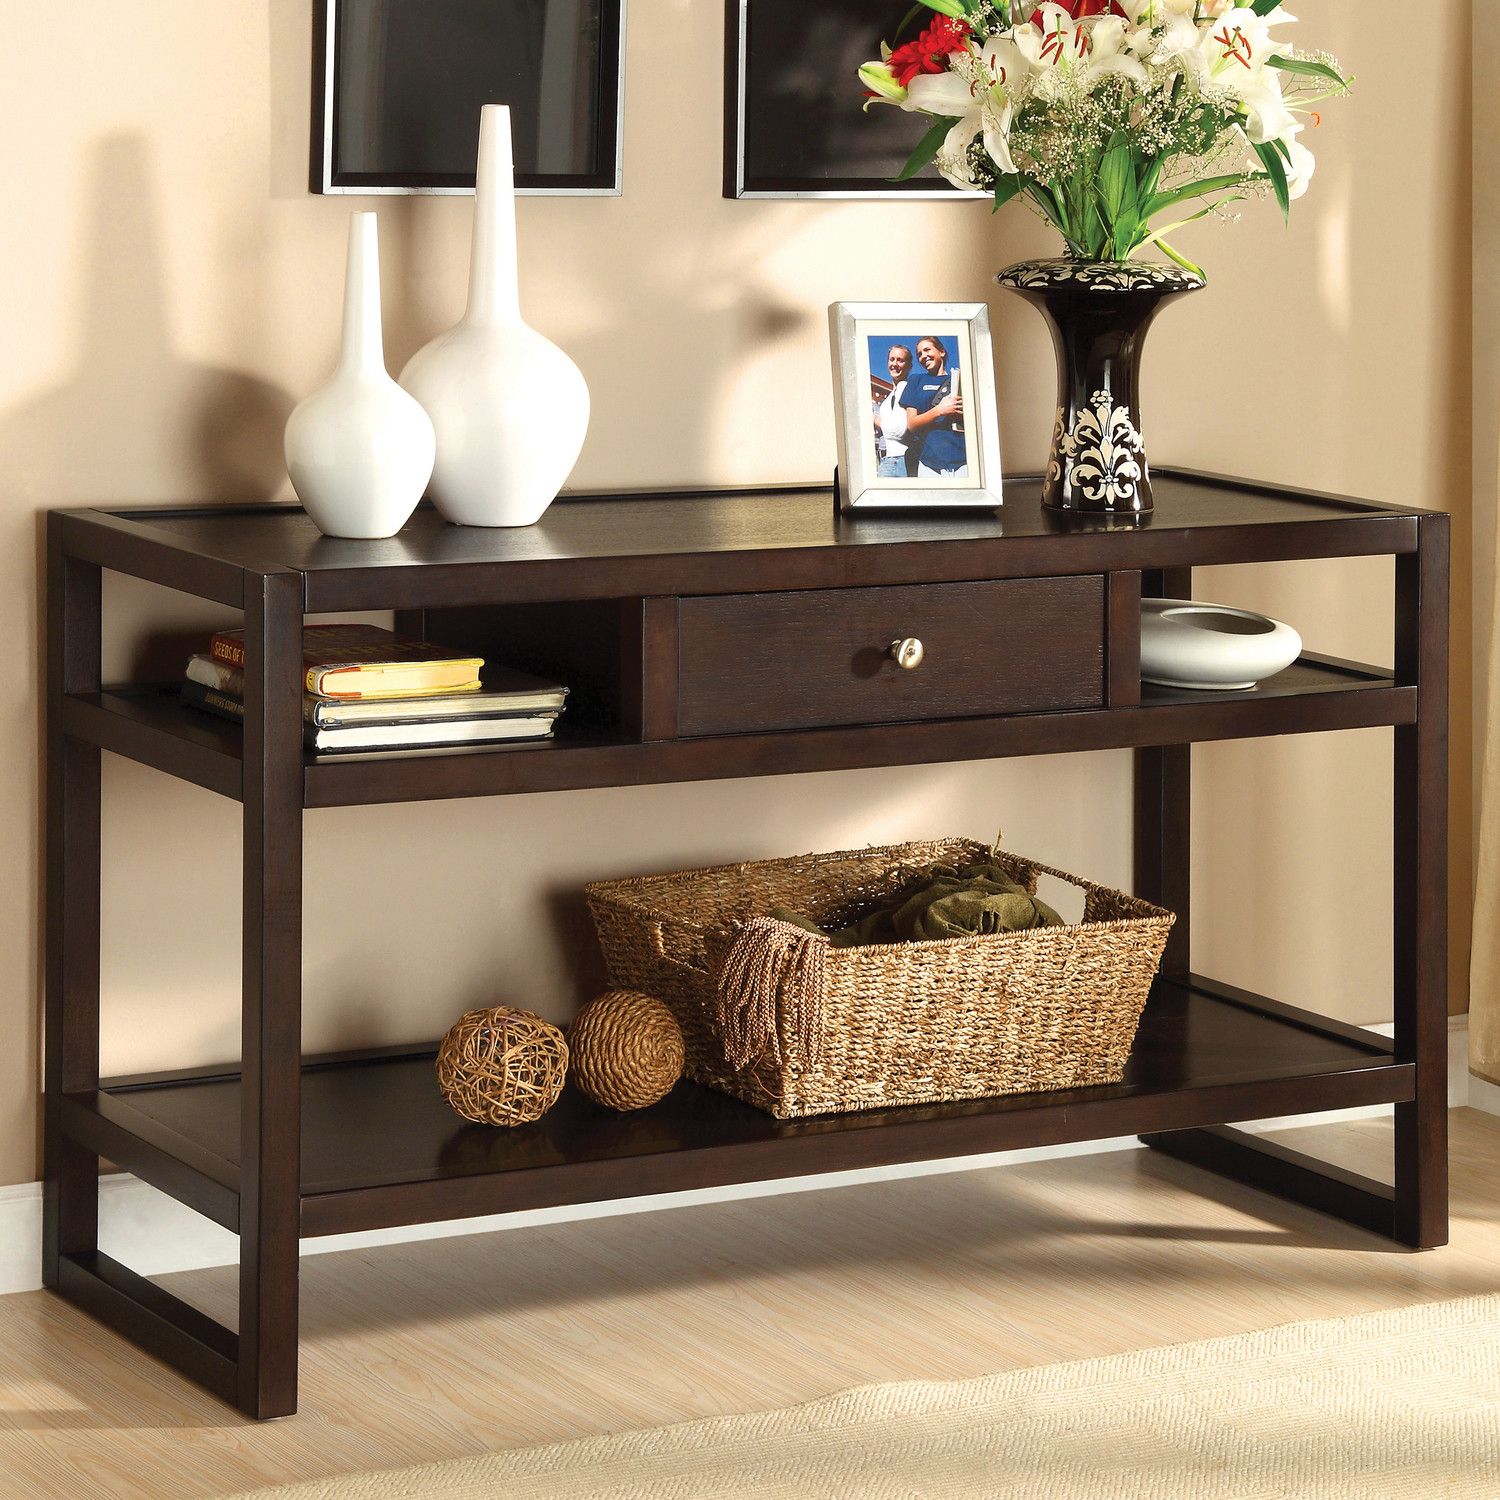 Between Wood And Glass Long Console Tables – Homesfeed Intended For 2 Piece Modern Nesting Console Tables (View 2 of 20)